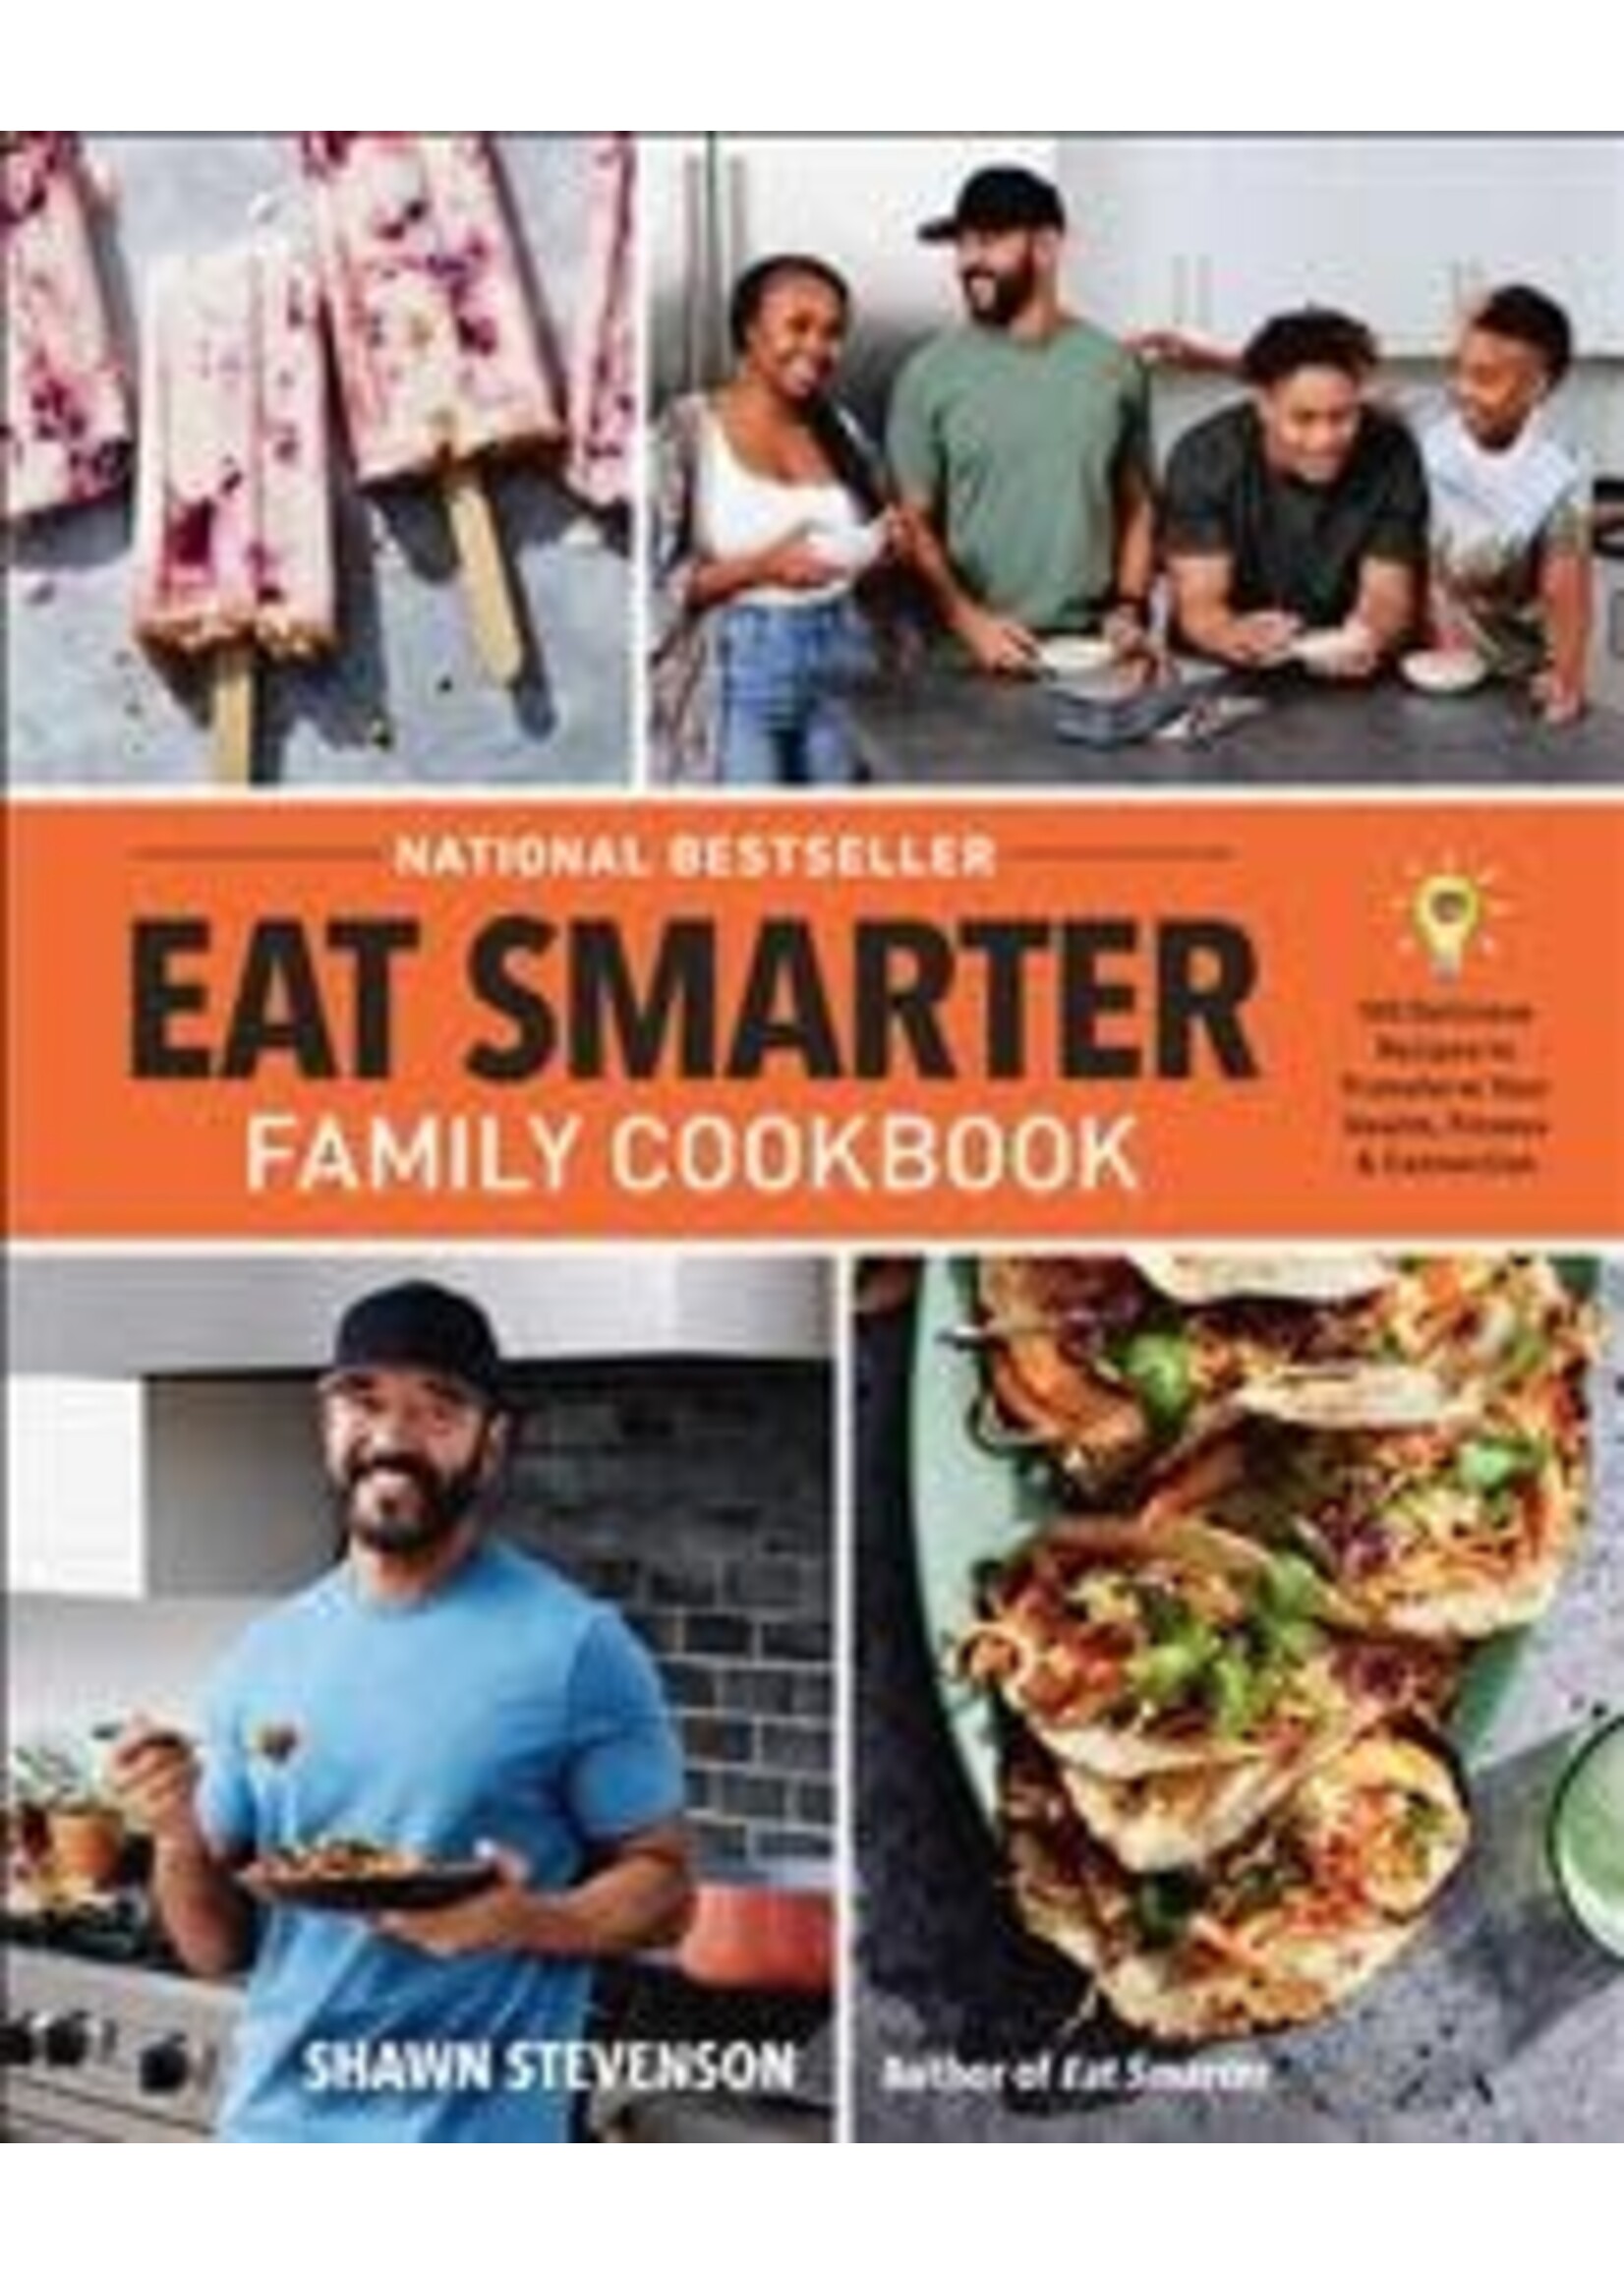 Eat Smarter Family Cookbook: 100 Delicious Recipes to Transform Your Health, Happiness, and Connection by Shawn Stevenson